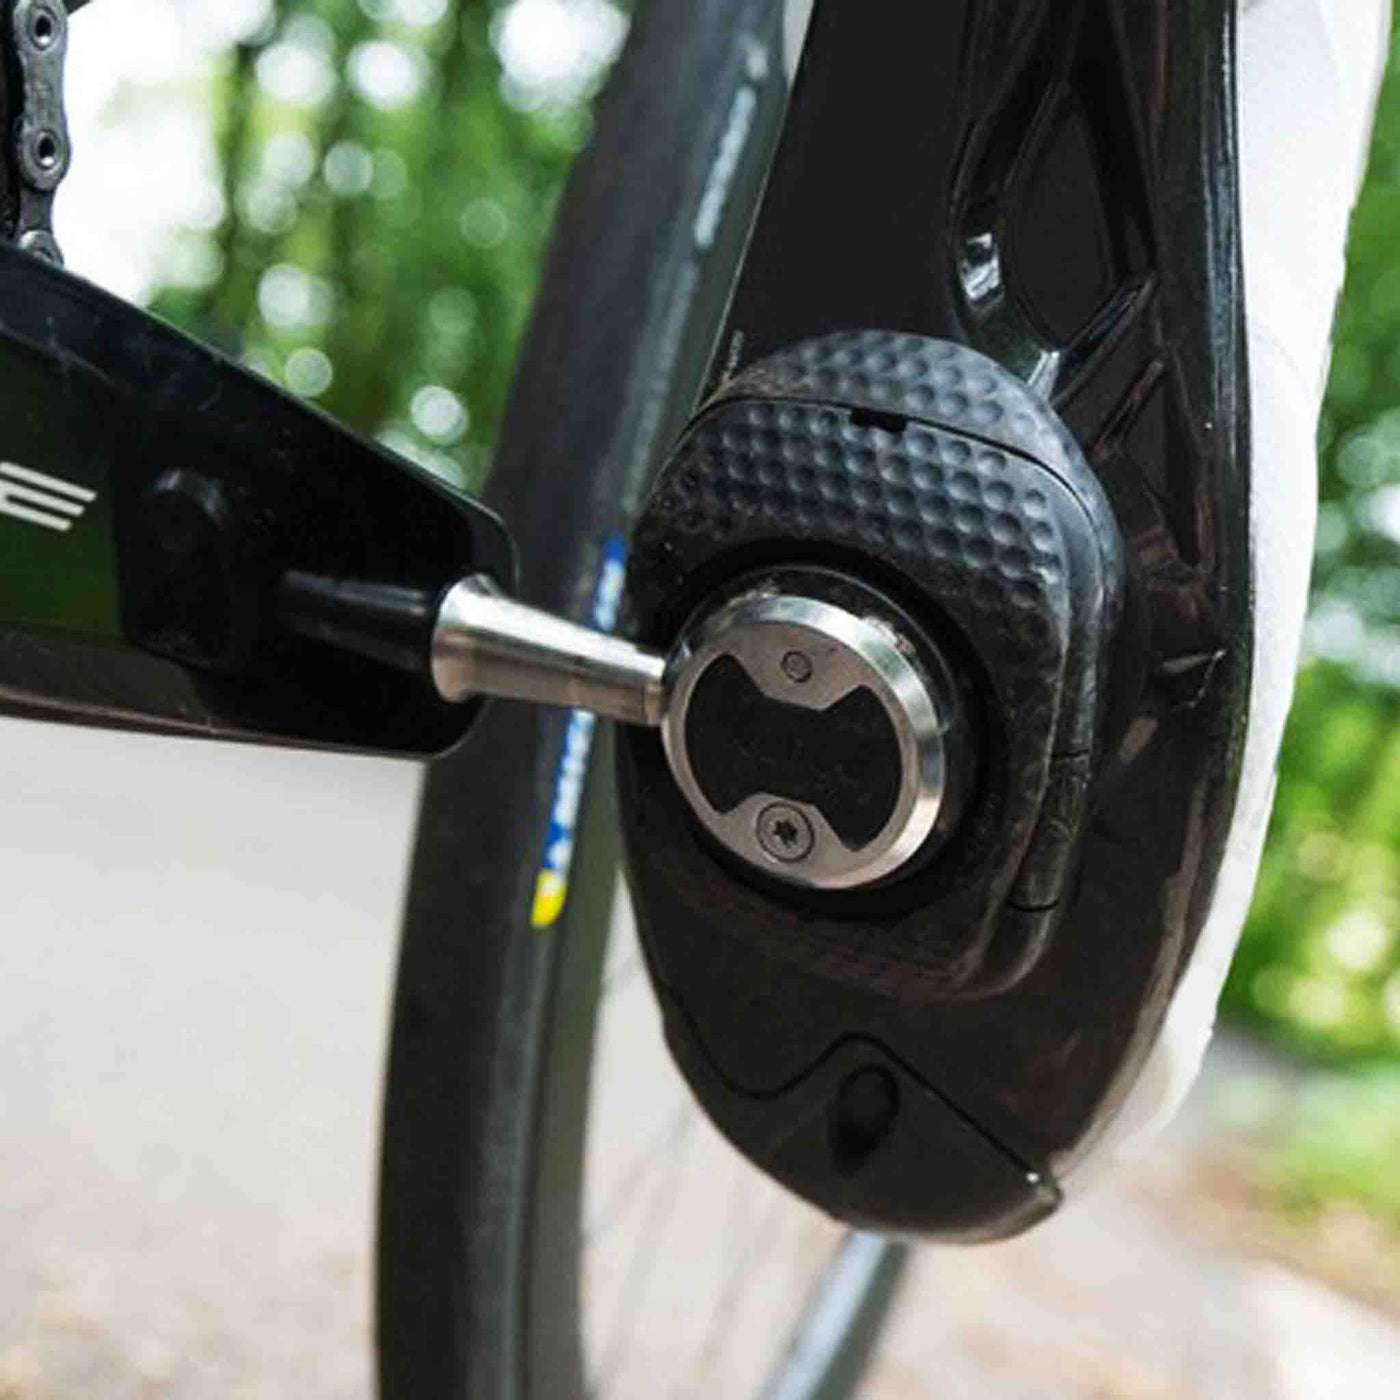 Road bike Pedals and cleats SPD from Shimano Look Keo Favero Assioma and long lusting cleats  for road cycling shoes